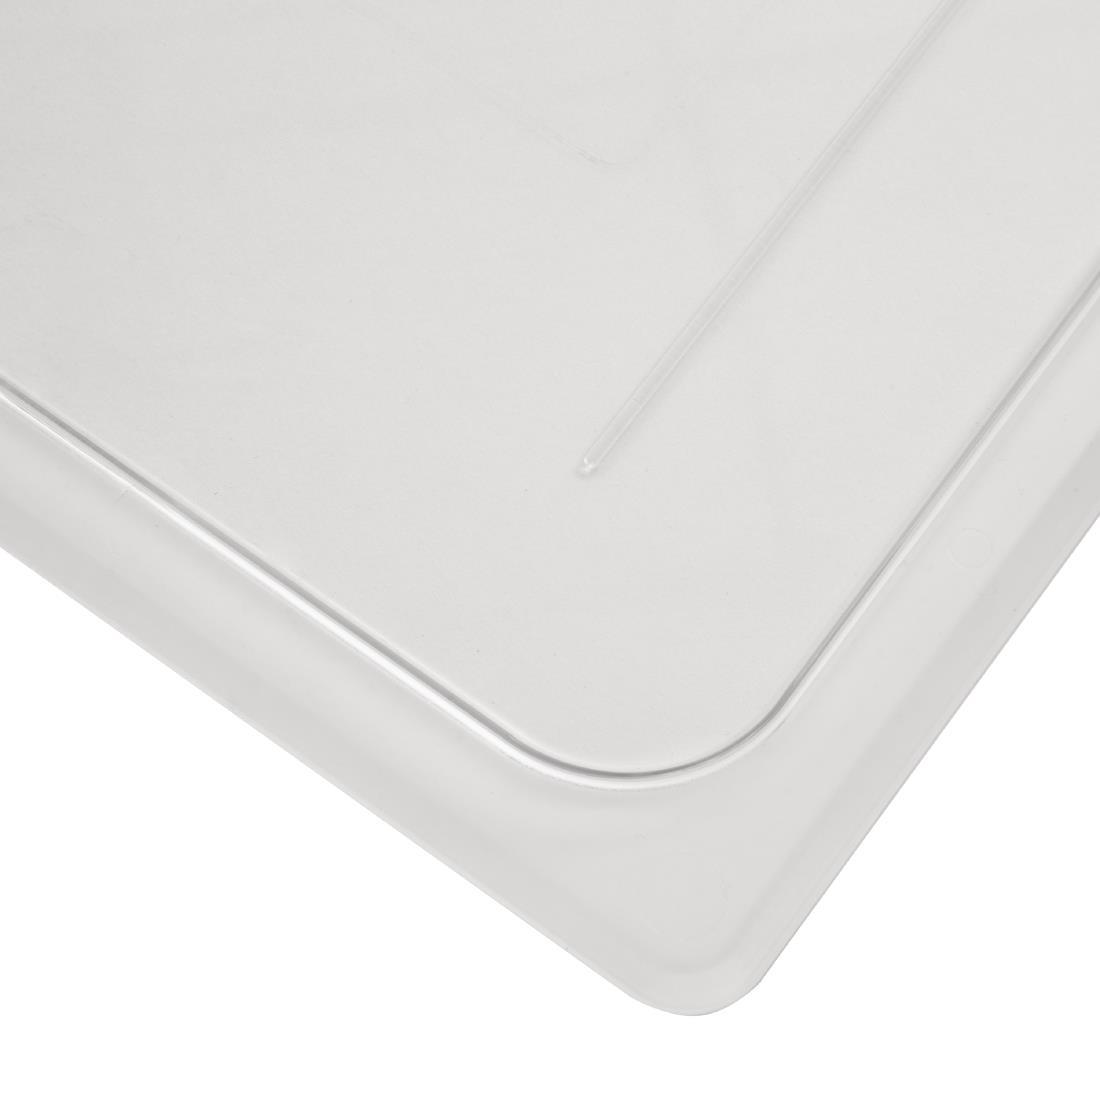 Cambro Clear Polycarbonate 1/2 Gastronorm Lid - DC663  - 5